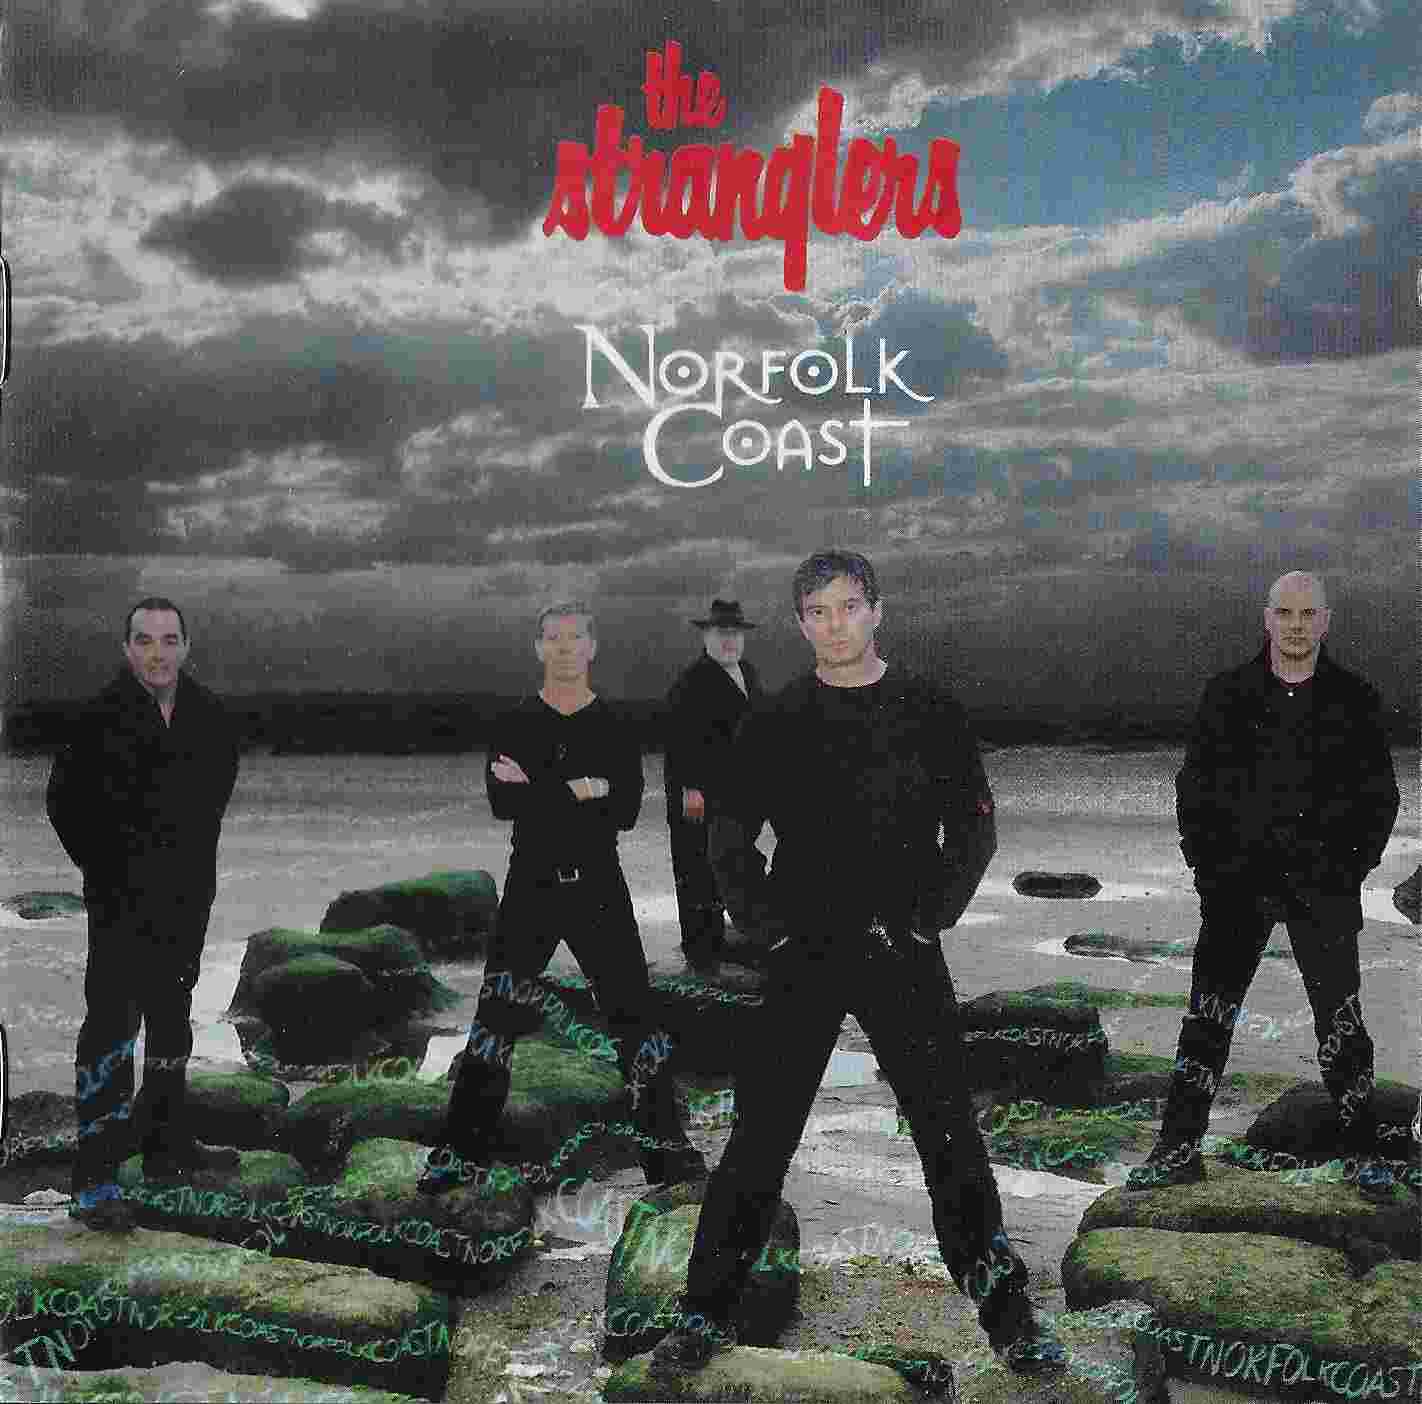 Picture of 969512 - 9 Norfolk coast by artist The Stranglers from The Stranglers